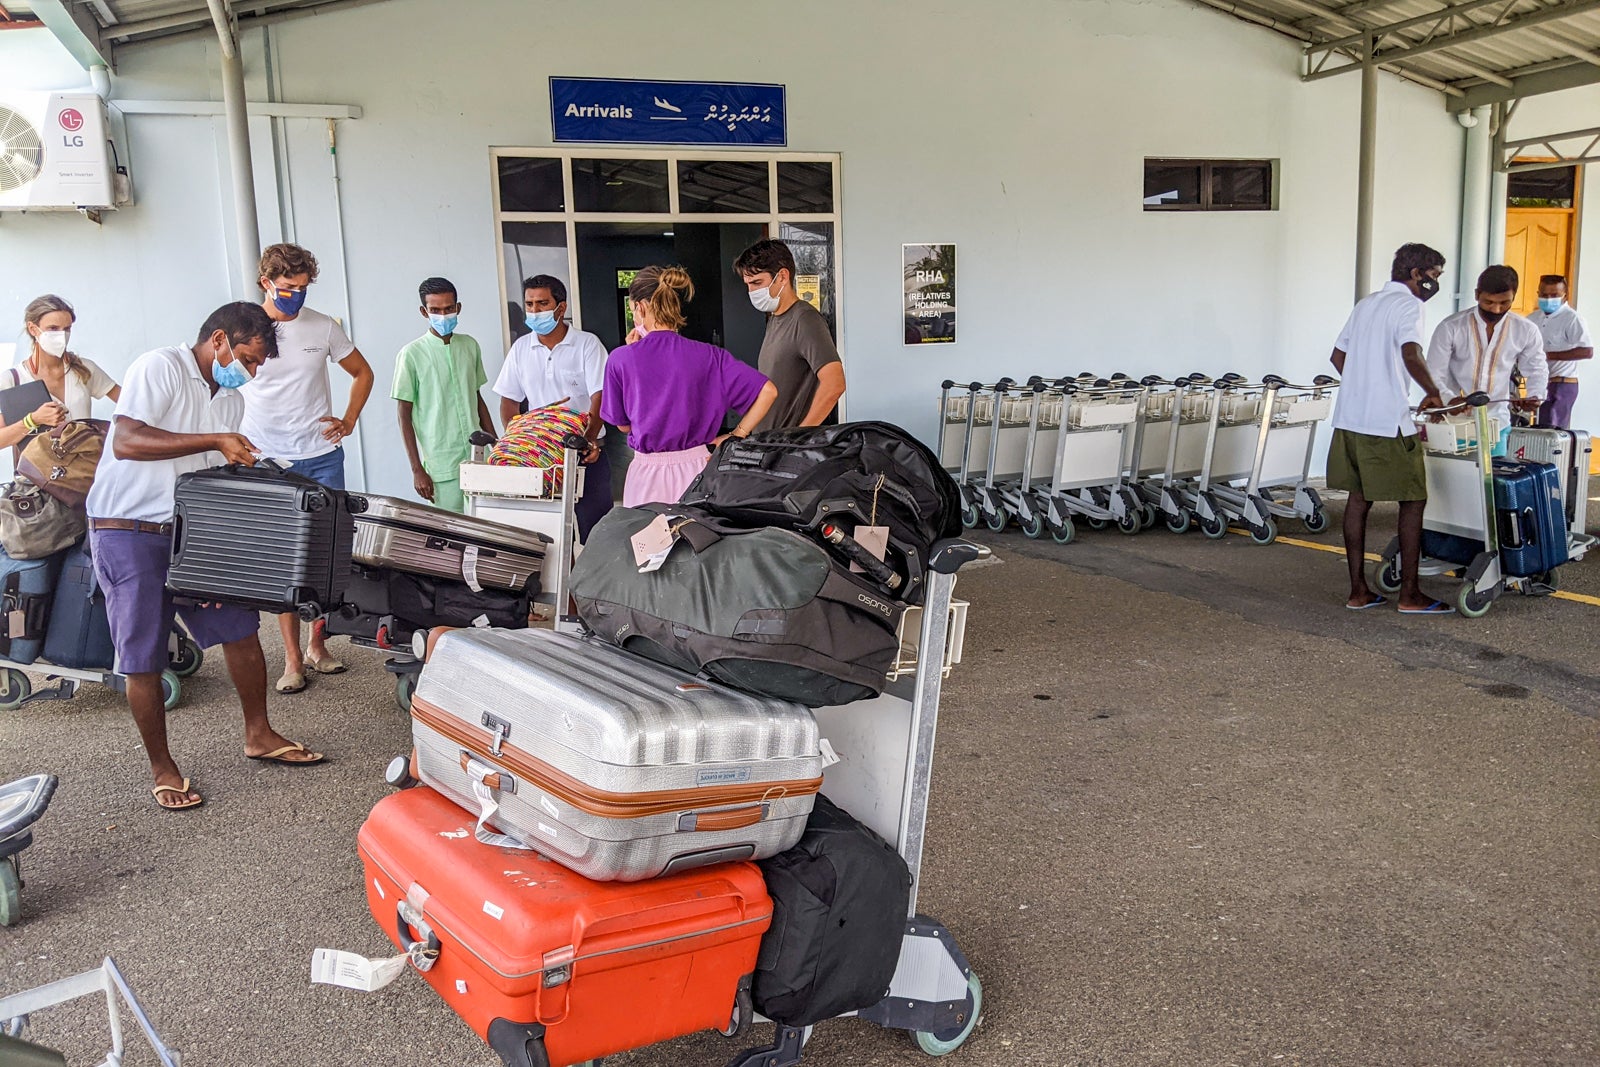 Arrivals area at Deplaning at Kadhdhoo airport